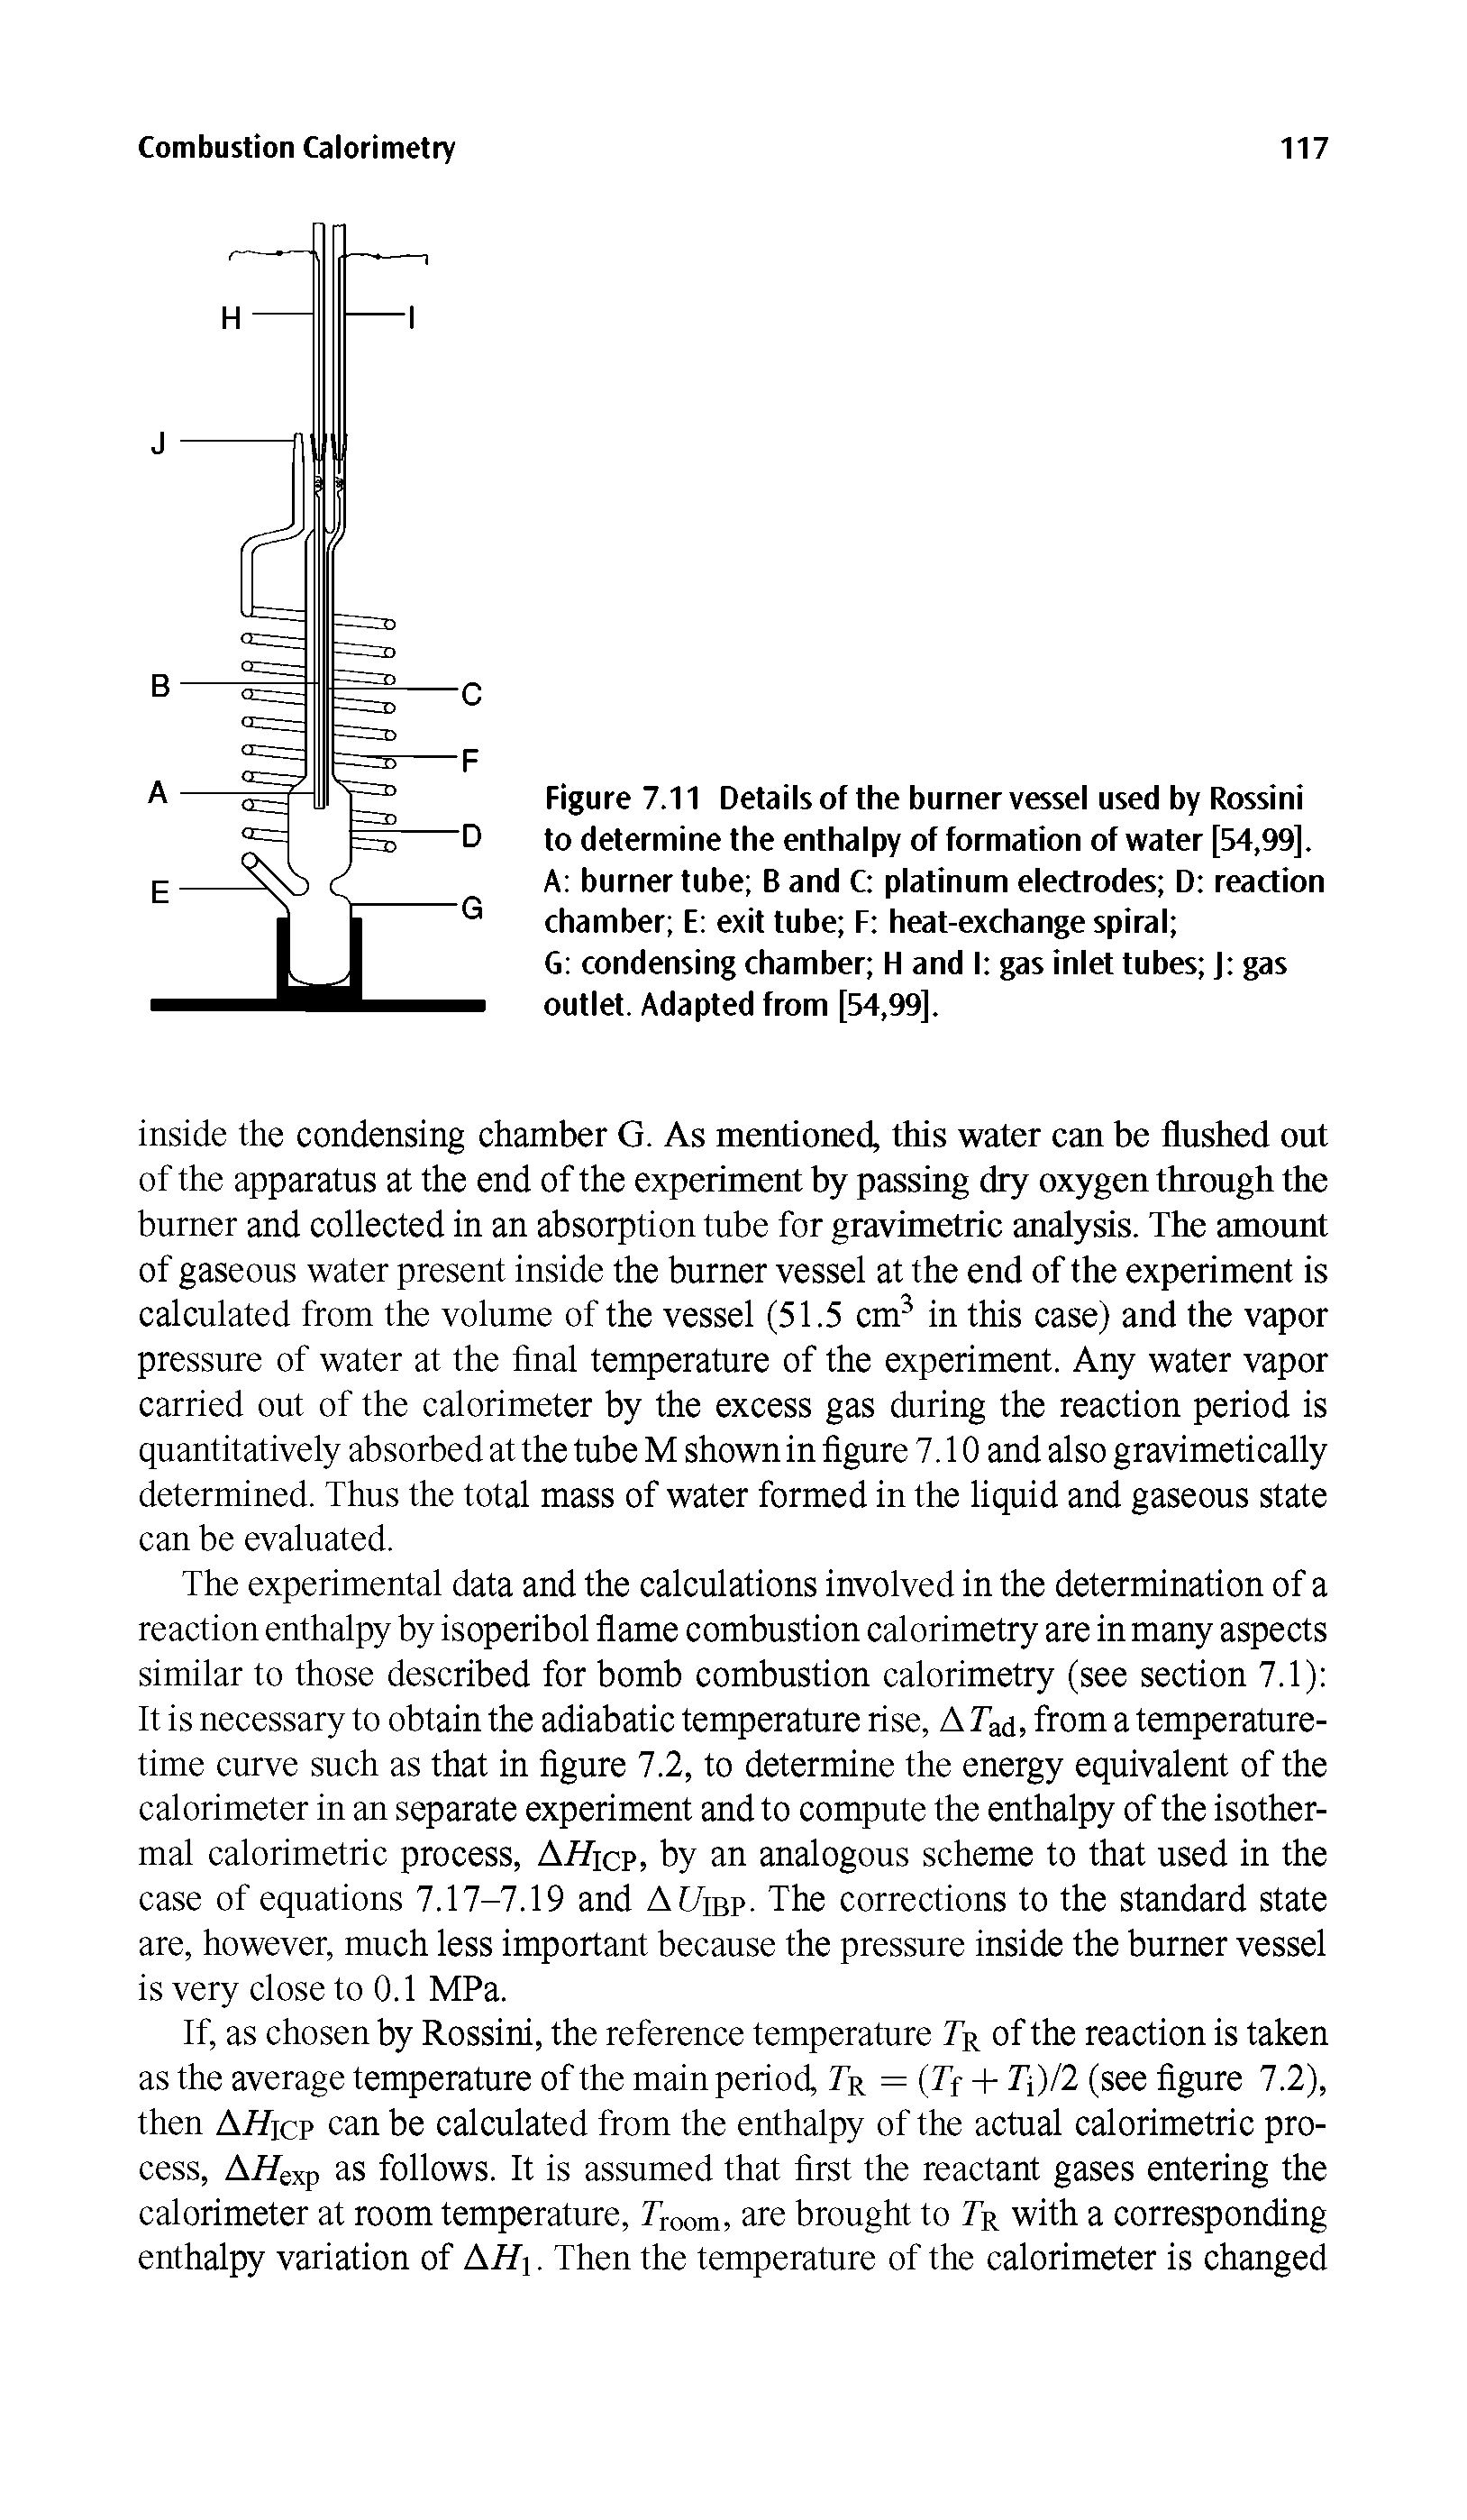 Figure 7.11 Details of the burner vessel used by Rossini to determine the enthalpy of formation of water [54,99], A burner tube B and C platinum electrodes D reaction chamber E exit tube F heat-exchange spiral ...